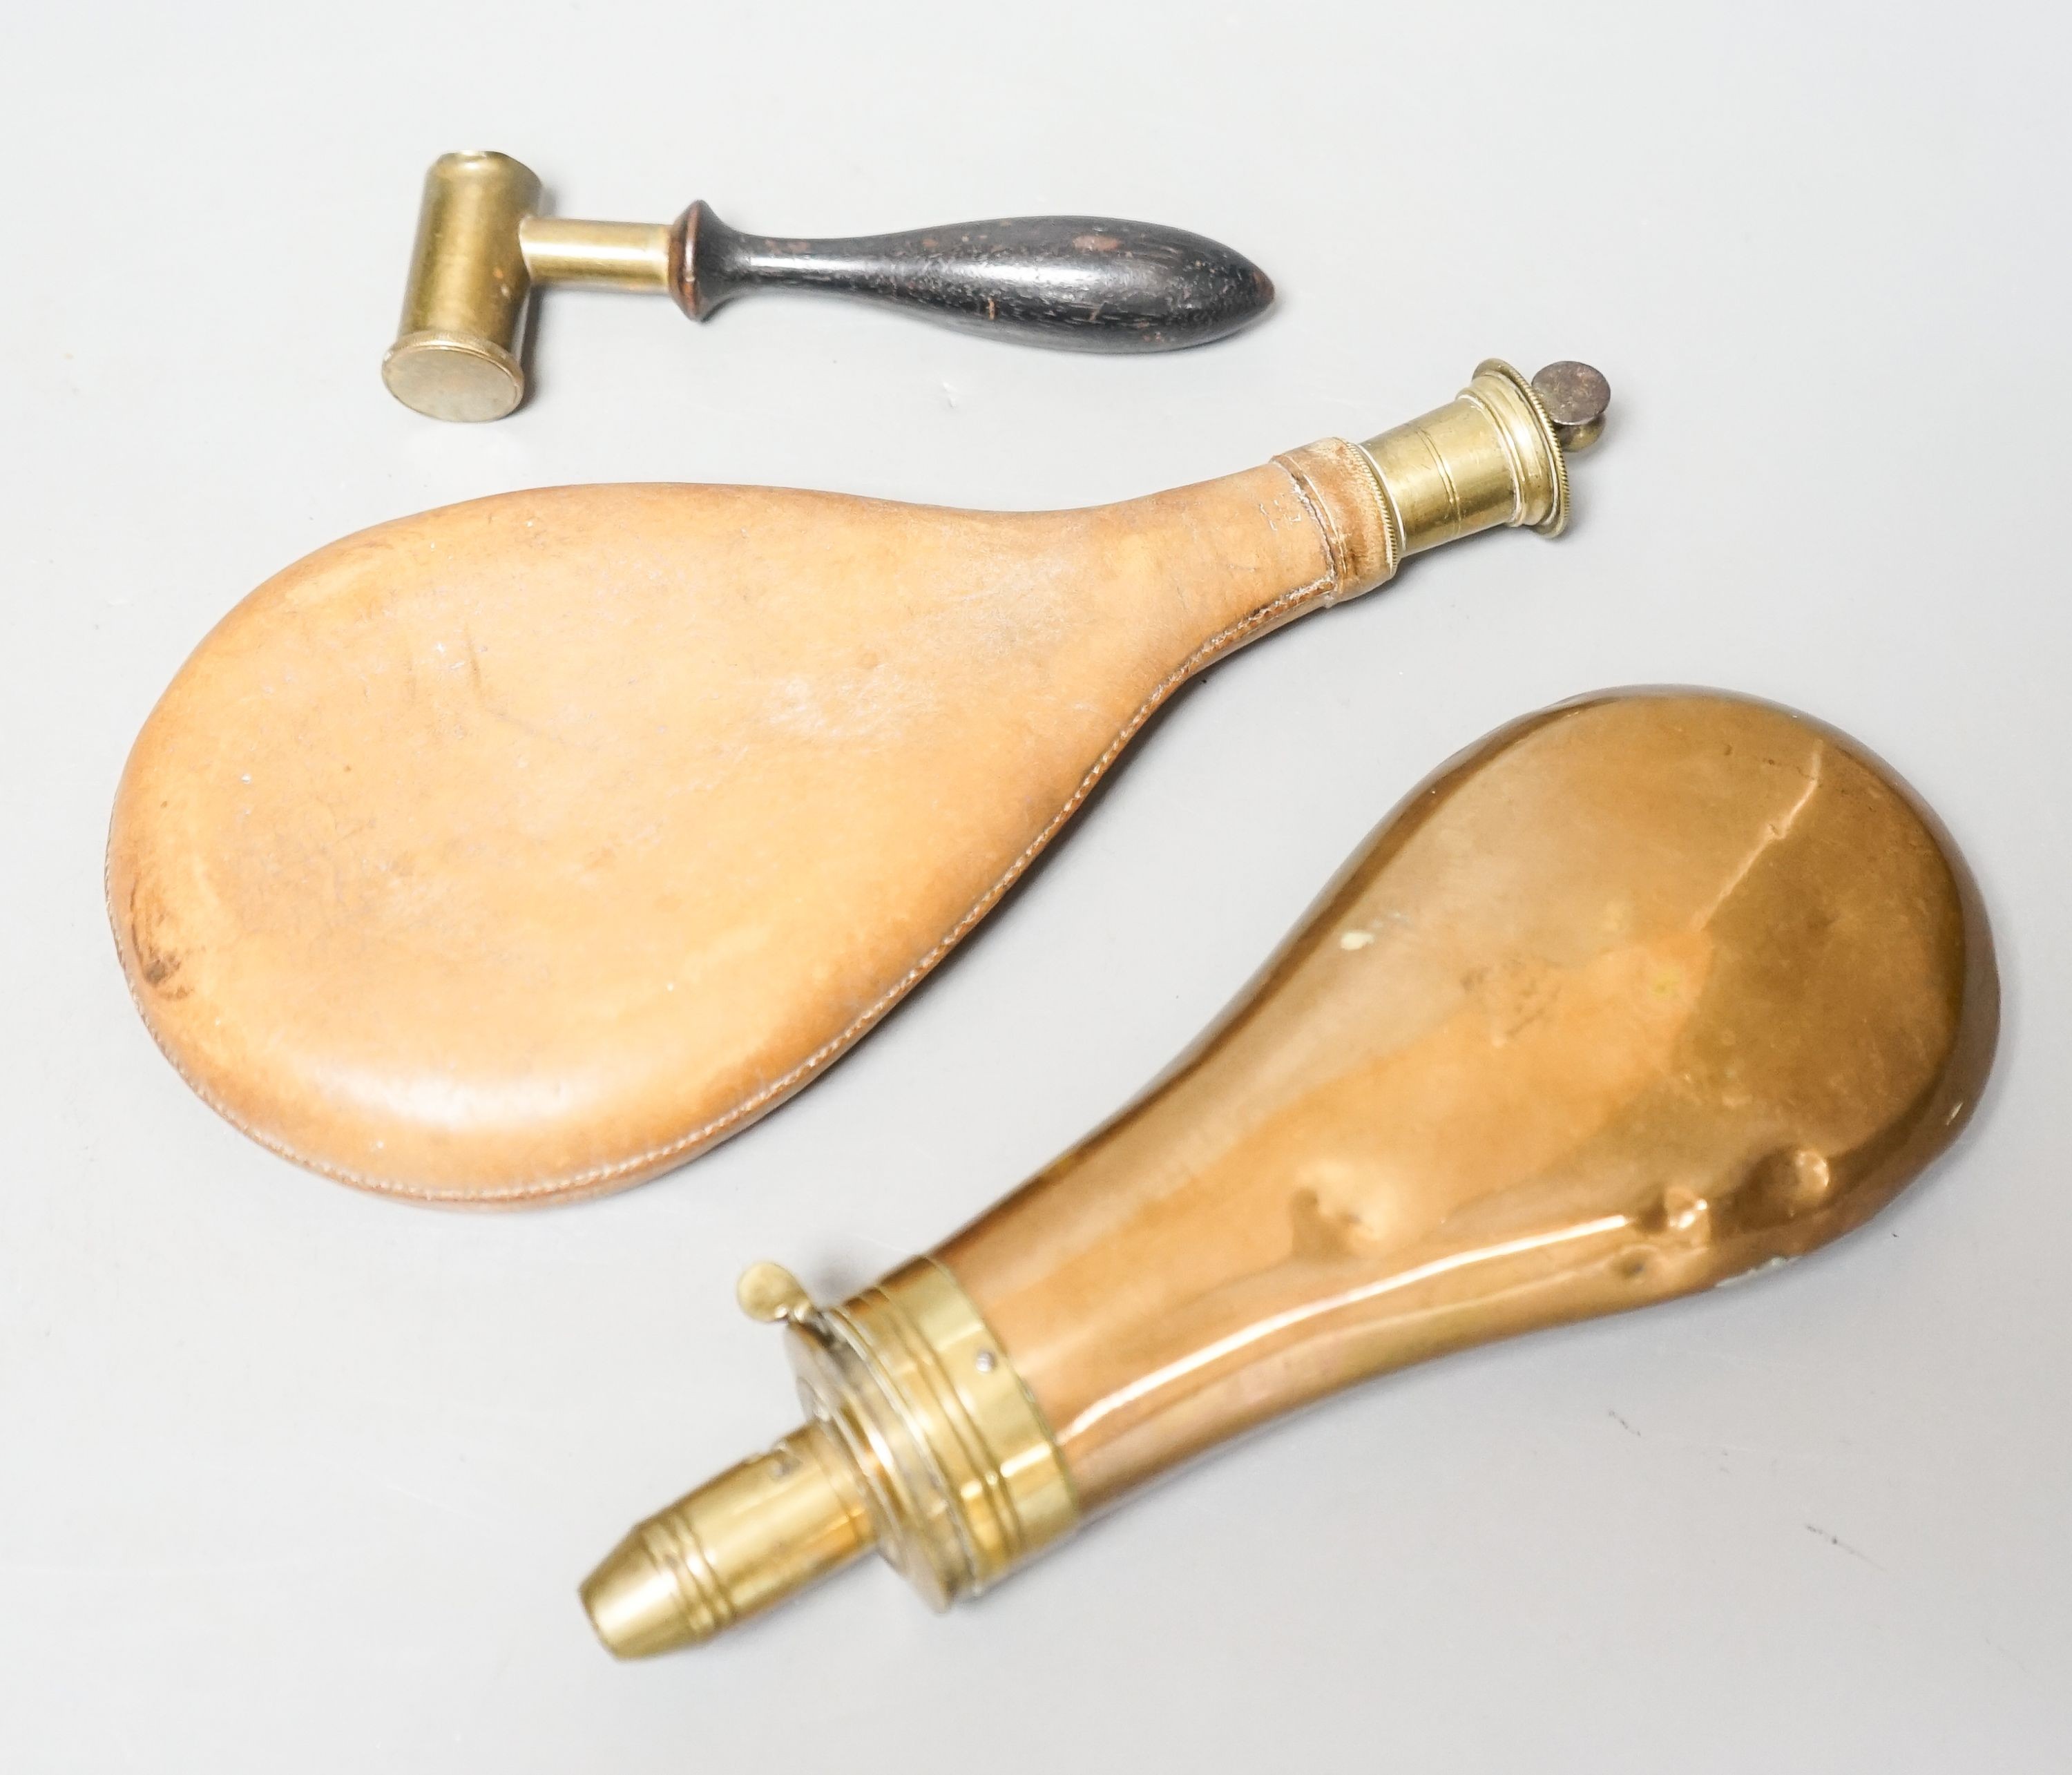 Two 19th century shot flasks and a powder measure